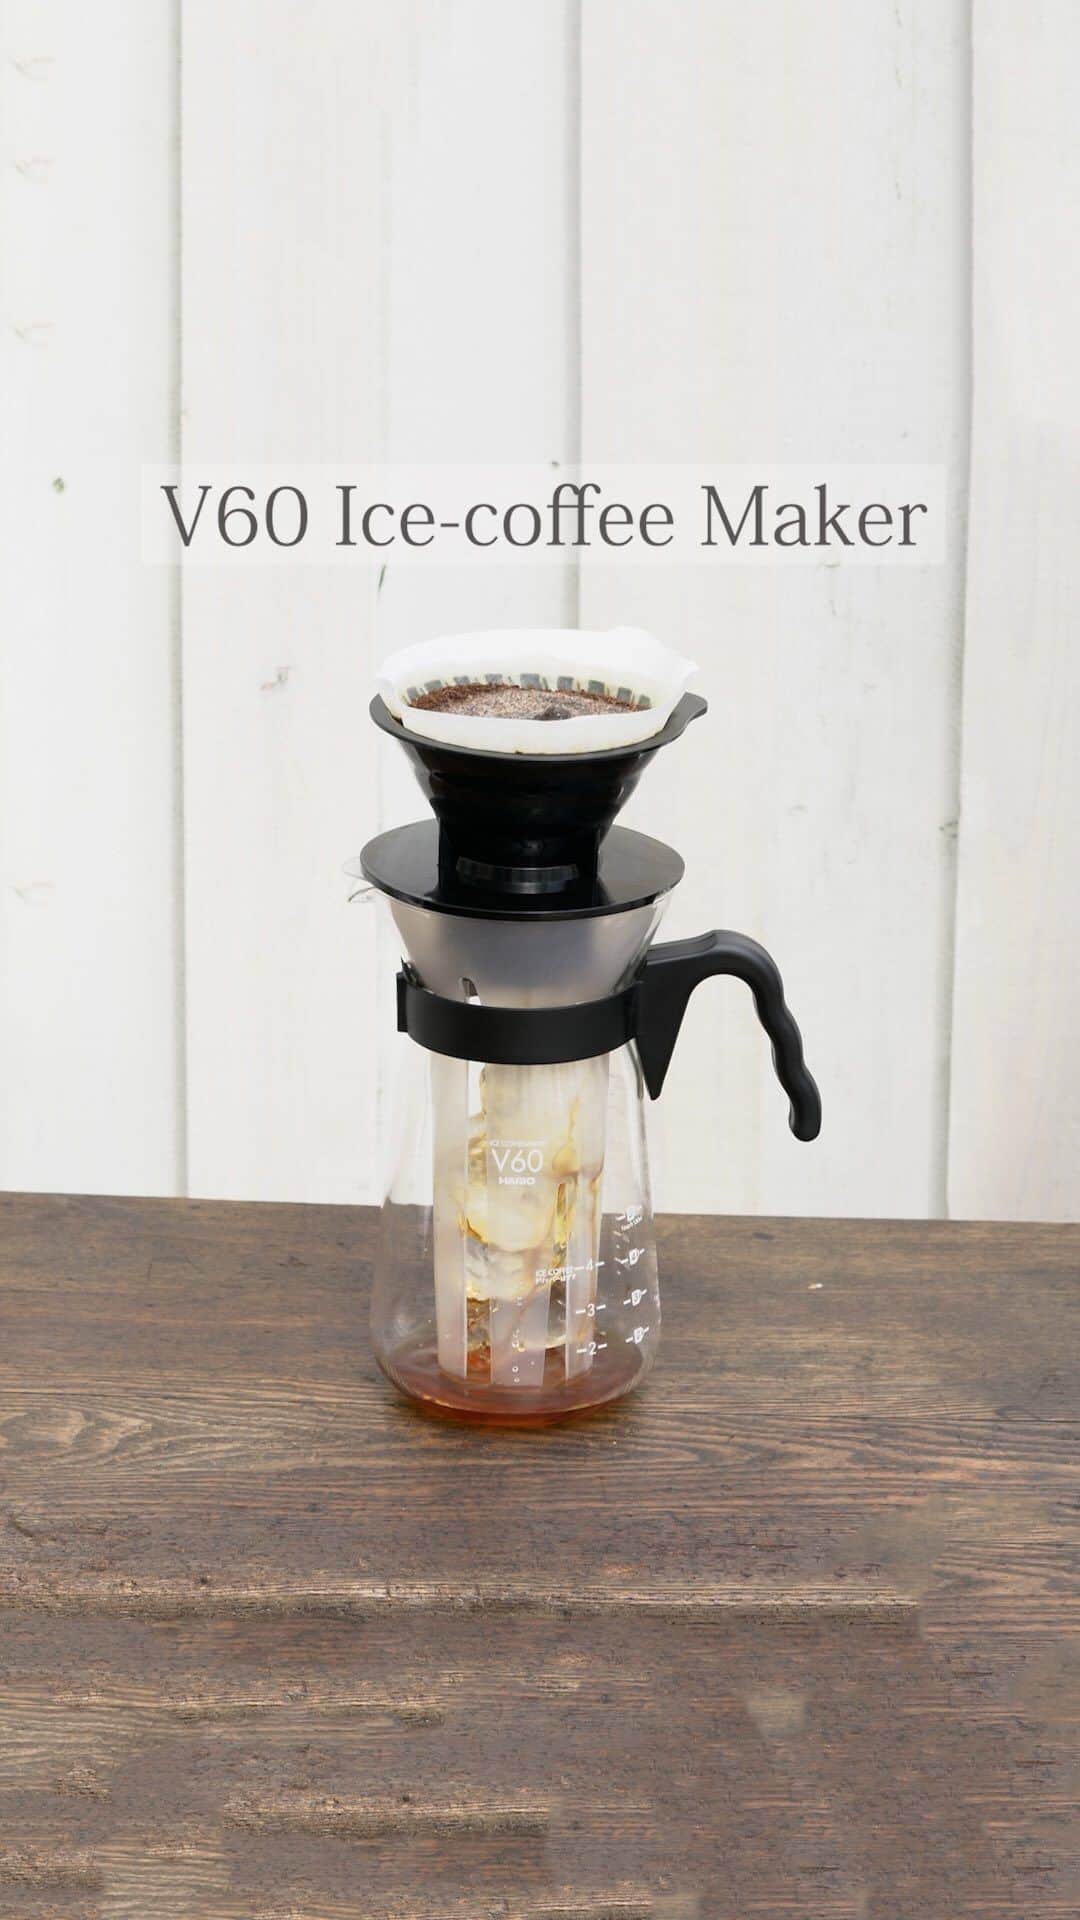 HARIOのインスタグラム：「ㅤㅤㅤㅤㅤㅤㅤㅤㅤㅤㅤㅤ [V60 Ice-coffee Maker]  ドリップしながら氷で冷やす。急冷式アイスコーヒーメーカー。 長いアイスストレーナーがドリップしたてのコーヒーを急冷するので、アイスコーヒーが手軽にすぐ愉しめます。ドリッパーはコーヒー粉の層が深くなる「V型円すい形」。しっかり旨味を抽出します。 —— Rapid cooling iced coffee maker. A long ice strainer rapidly cools the dripped coffee, so that iced coffee can be enjoyed immediately. The cone shaped dripper forms a deep coffee ground layer, and thoroughly extracts the flavor of the coffee.  . . .  #hario #v60 #coffee #pourover #coldbrew #pourovercoffee #coffeetime #coffeelover #homebrew #specialtycoffee」